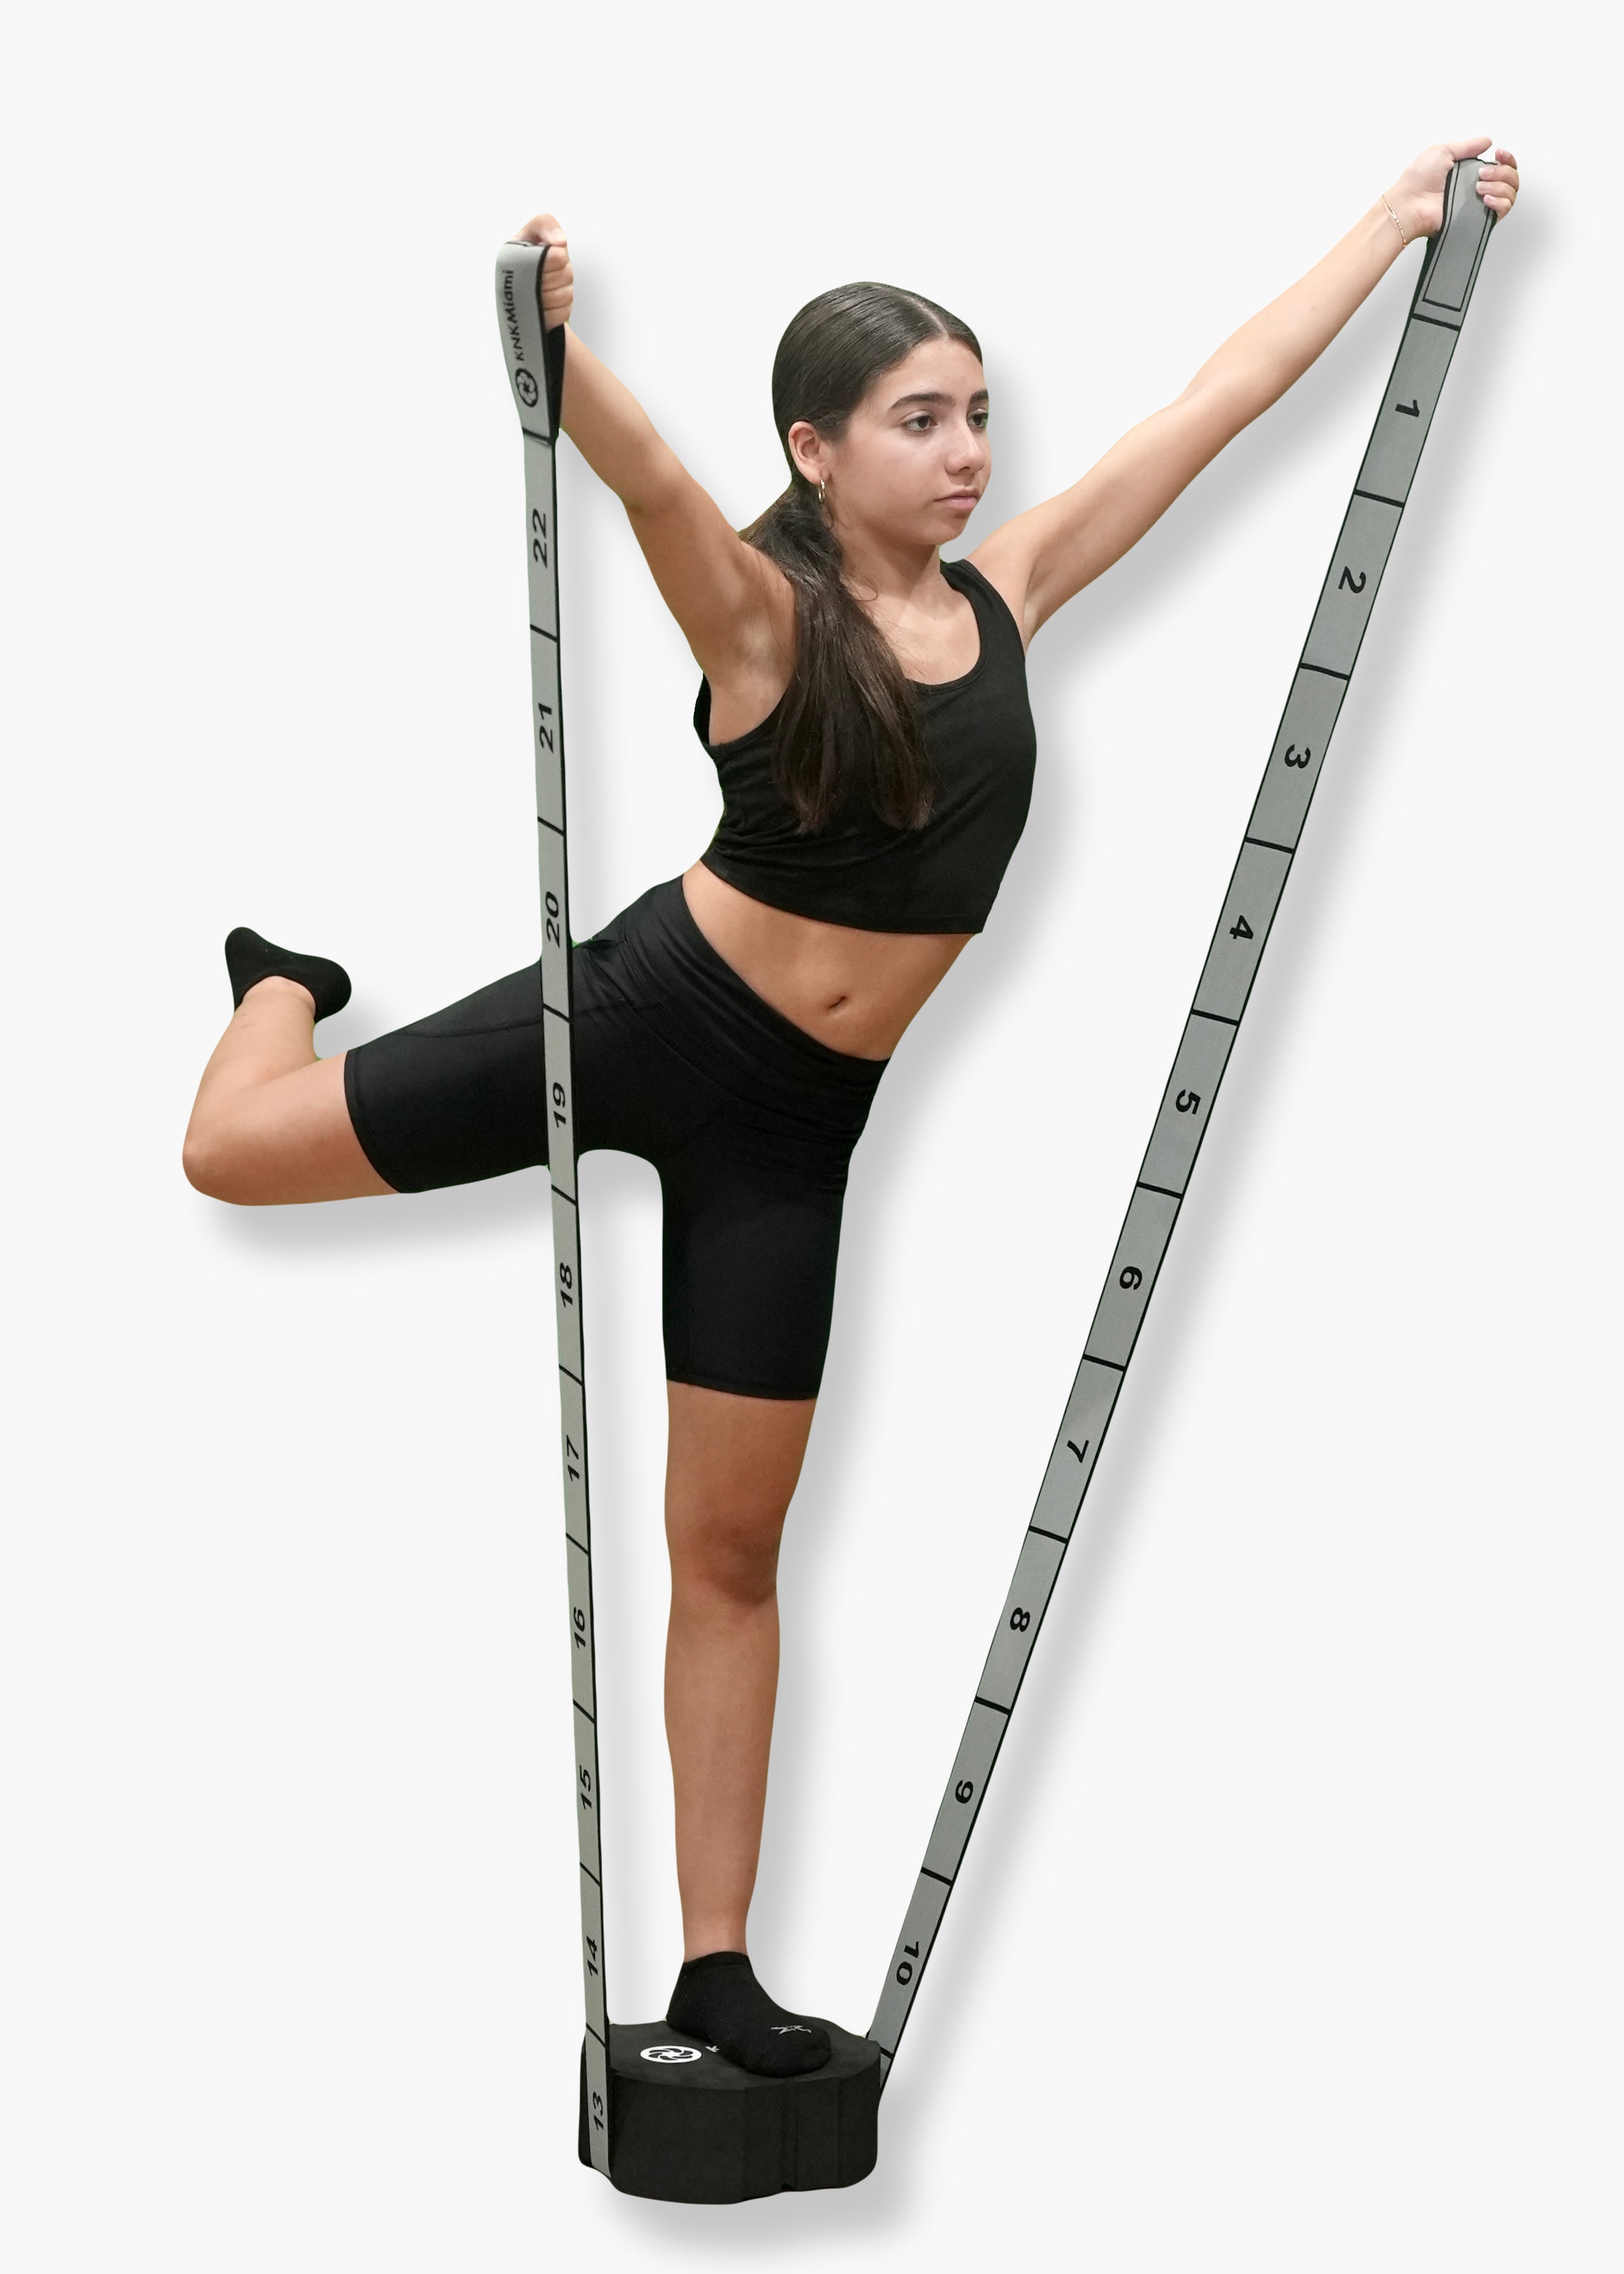 Resistance Band Stretches For Dancers – FROM THE TOP!